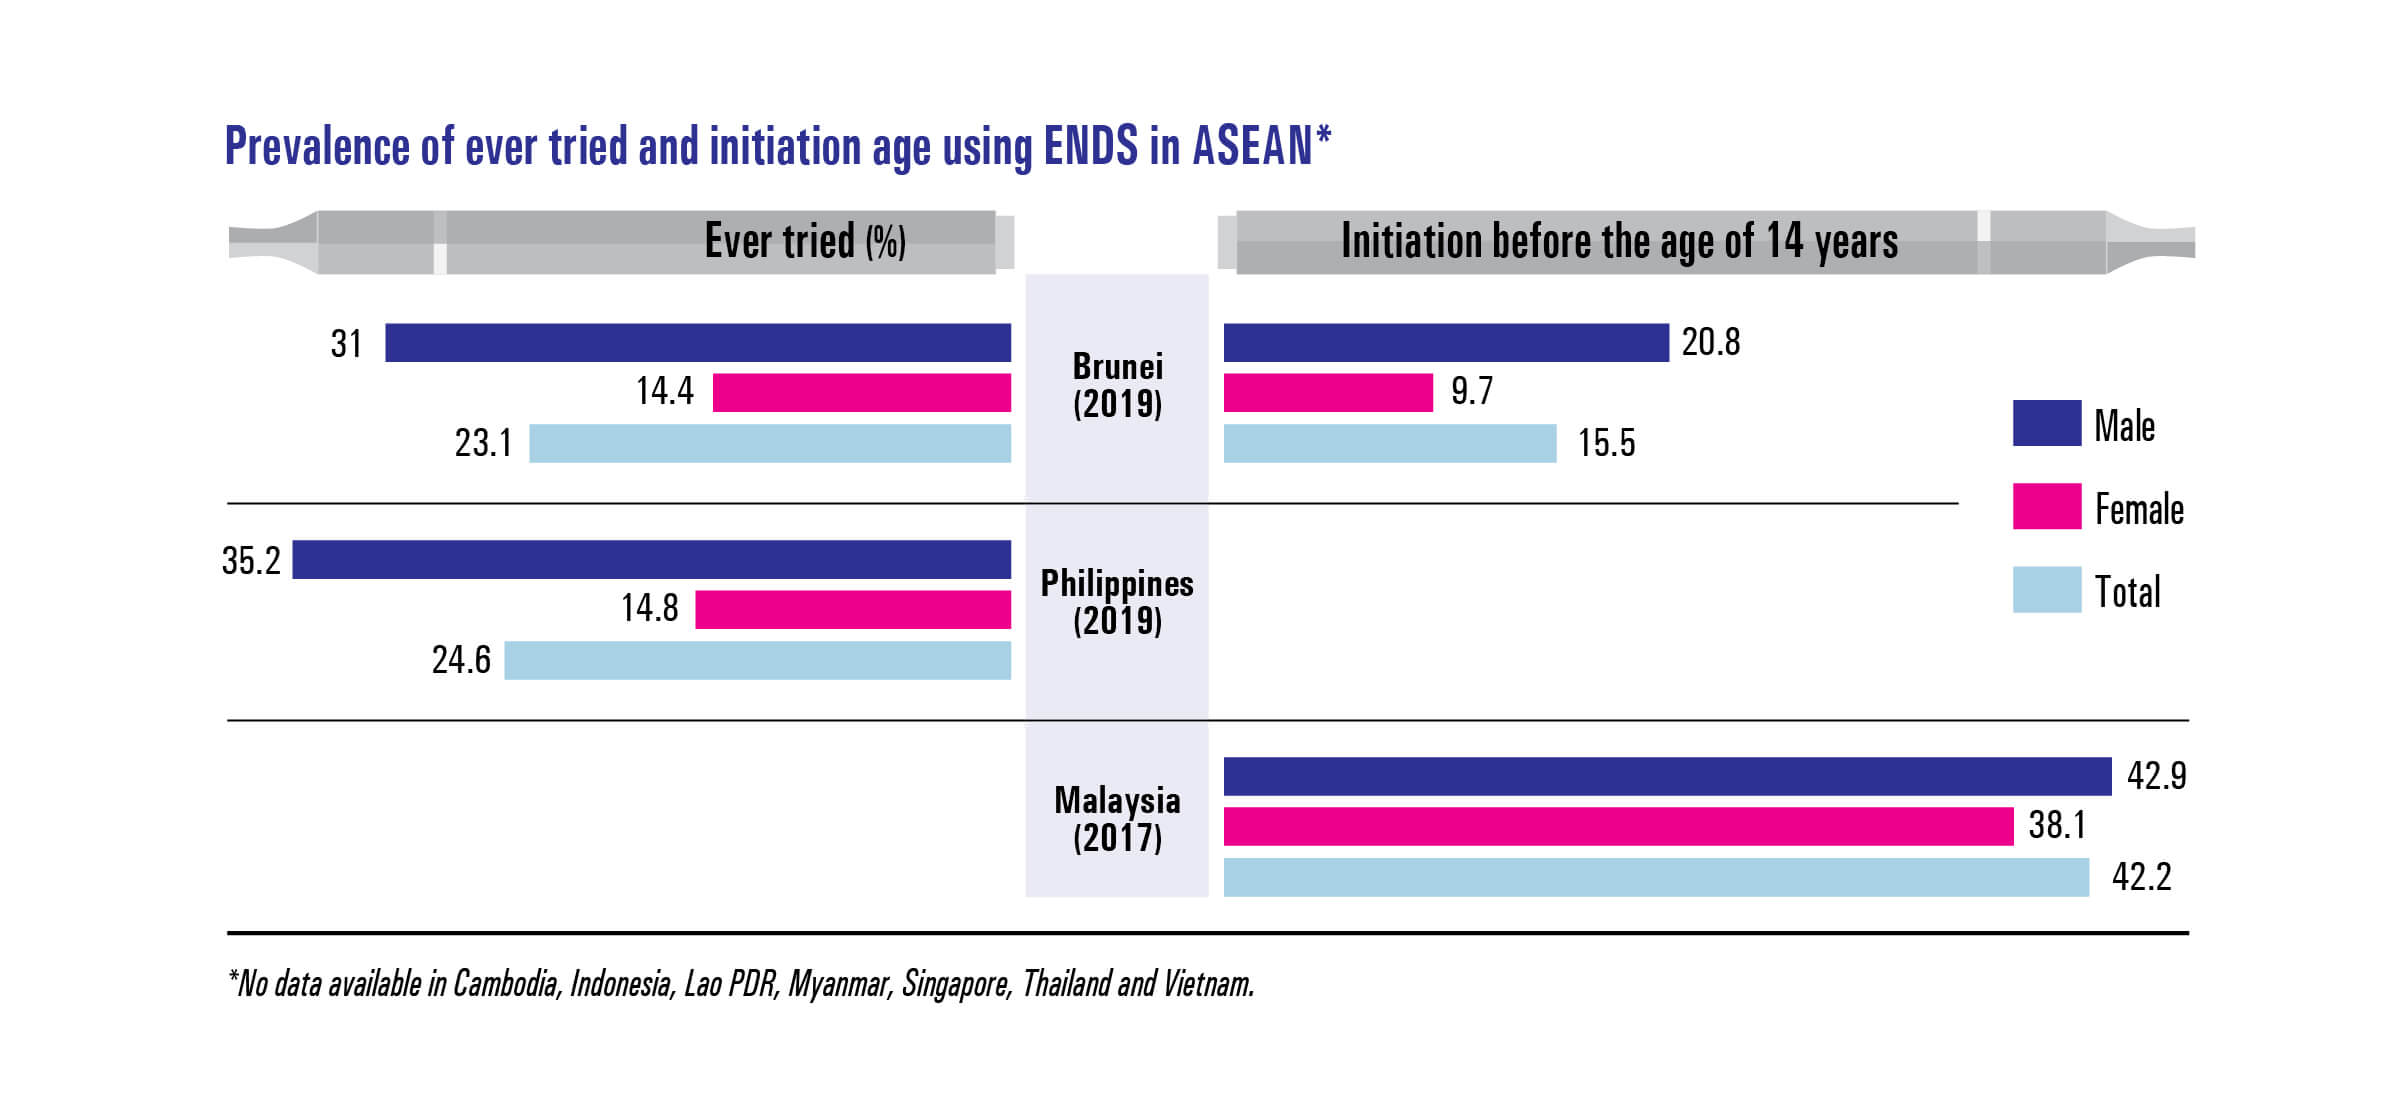 Prevalence of ever tried and initiation age using ENDS in ASEAN*